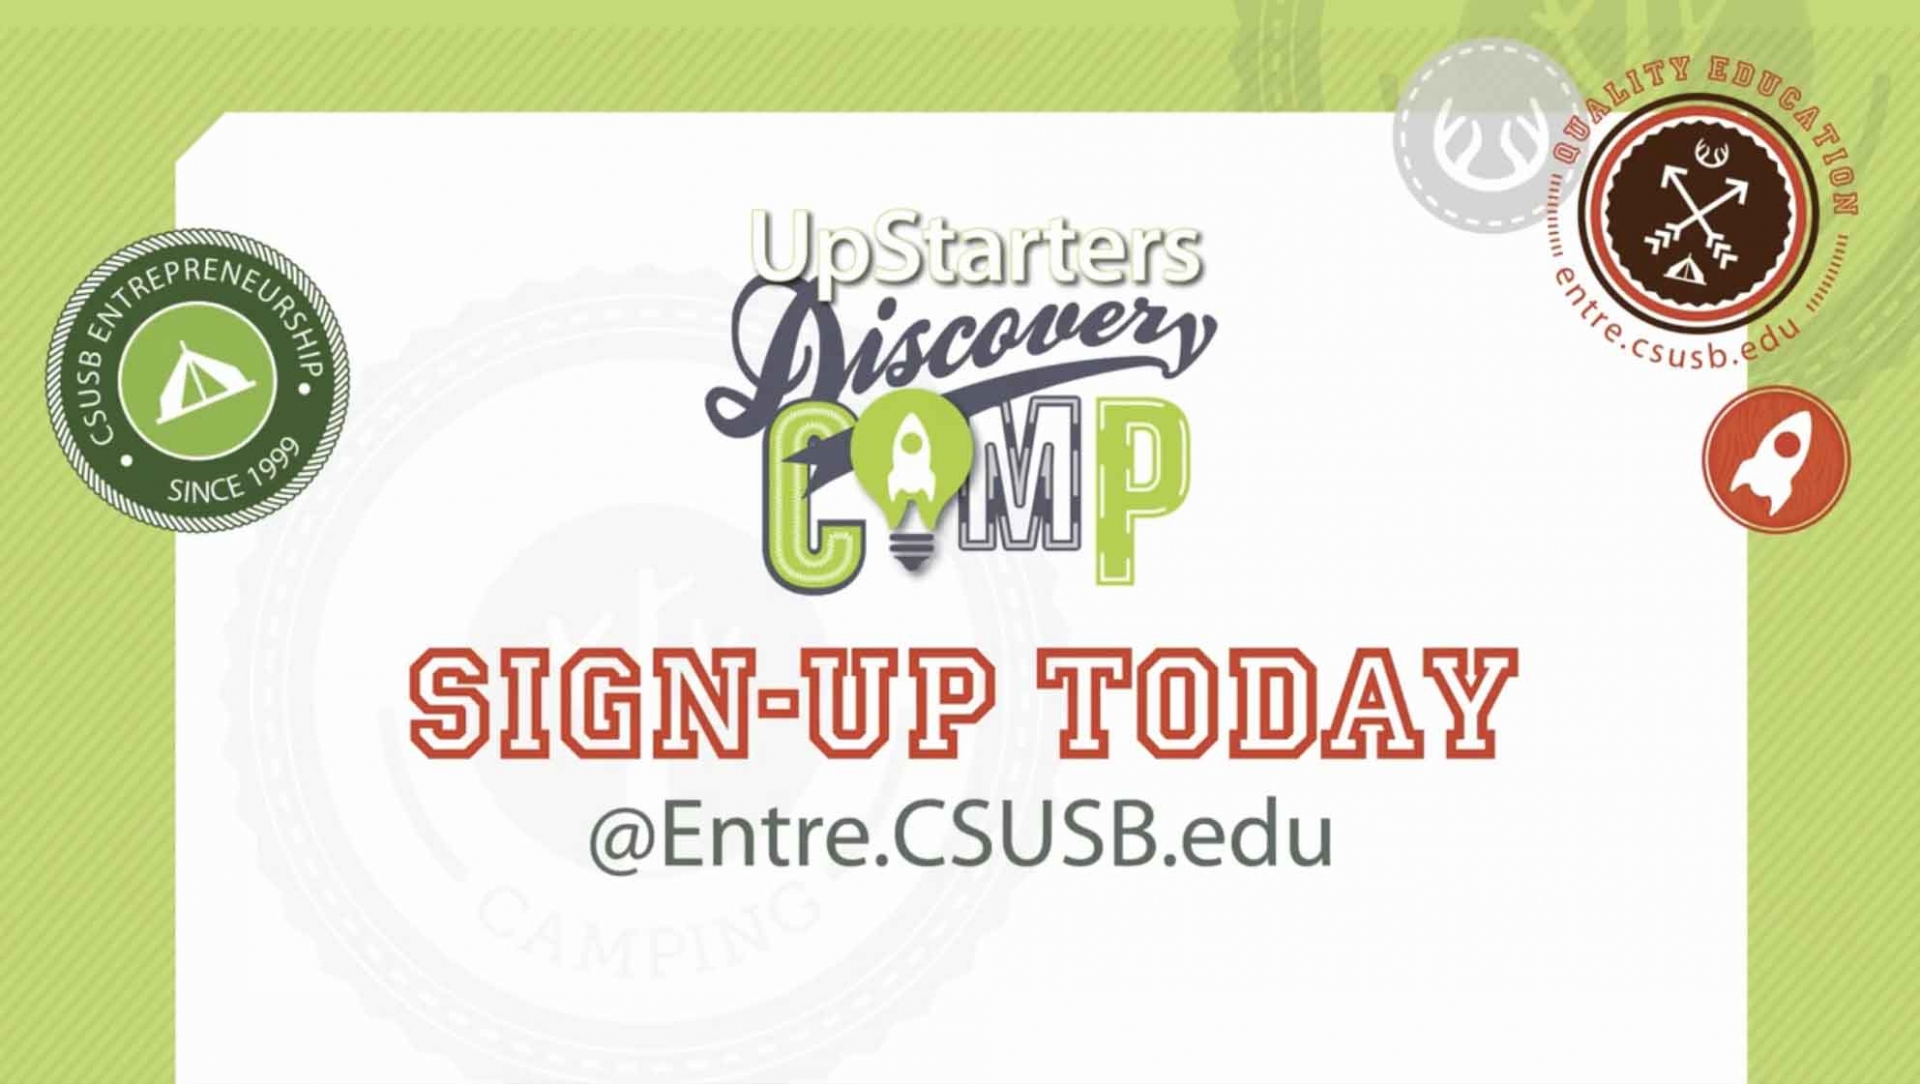 UpStarters Discovery Camp sign-up sheet.